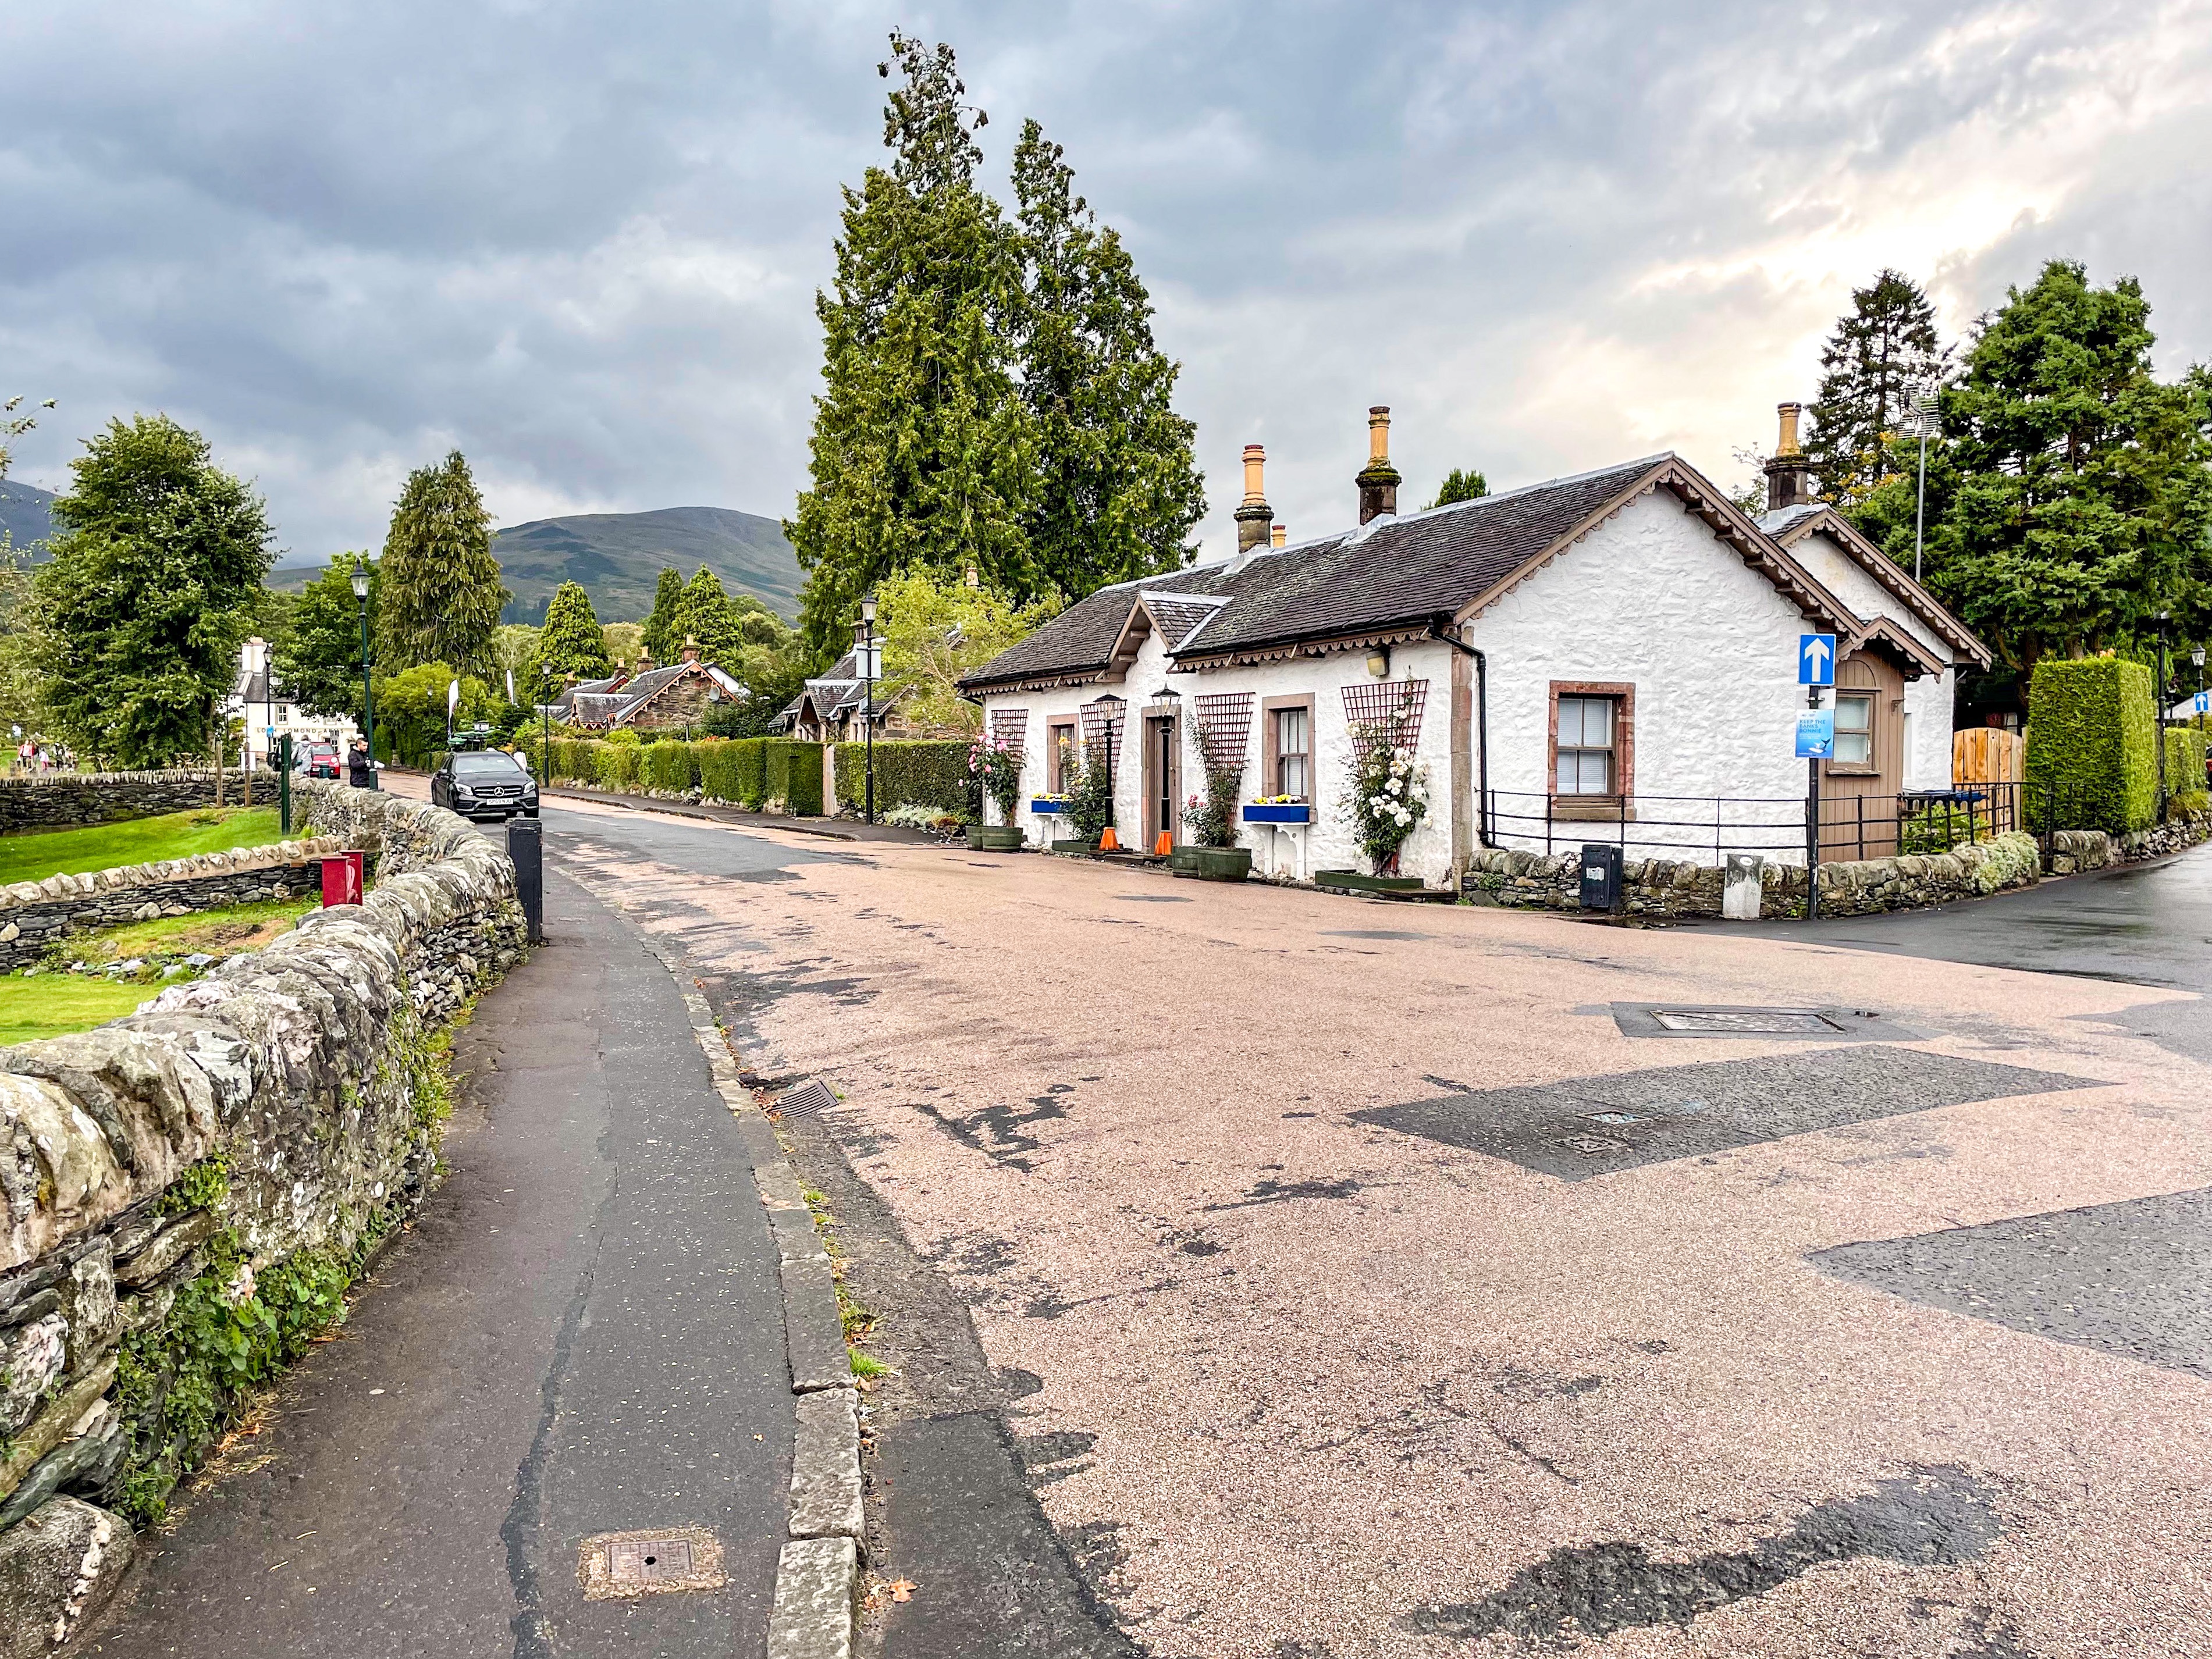 Scenic shot of the streets of Luss Scotland